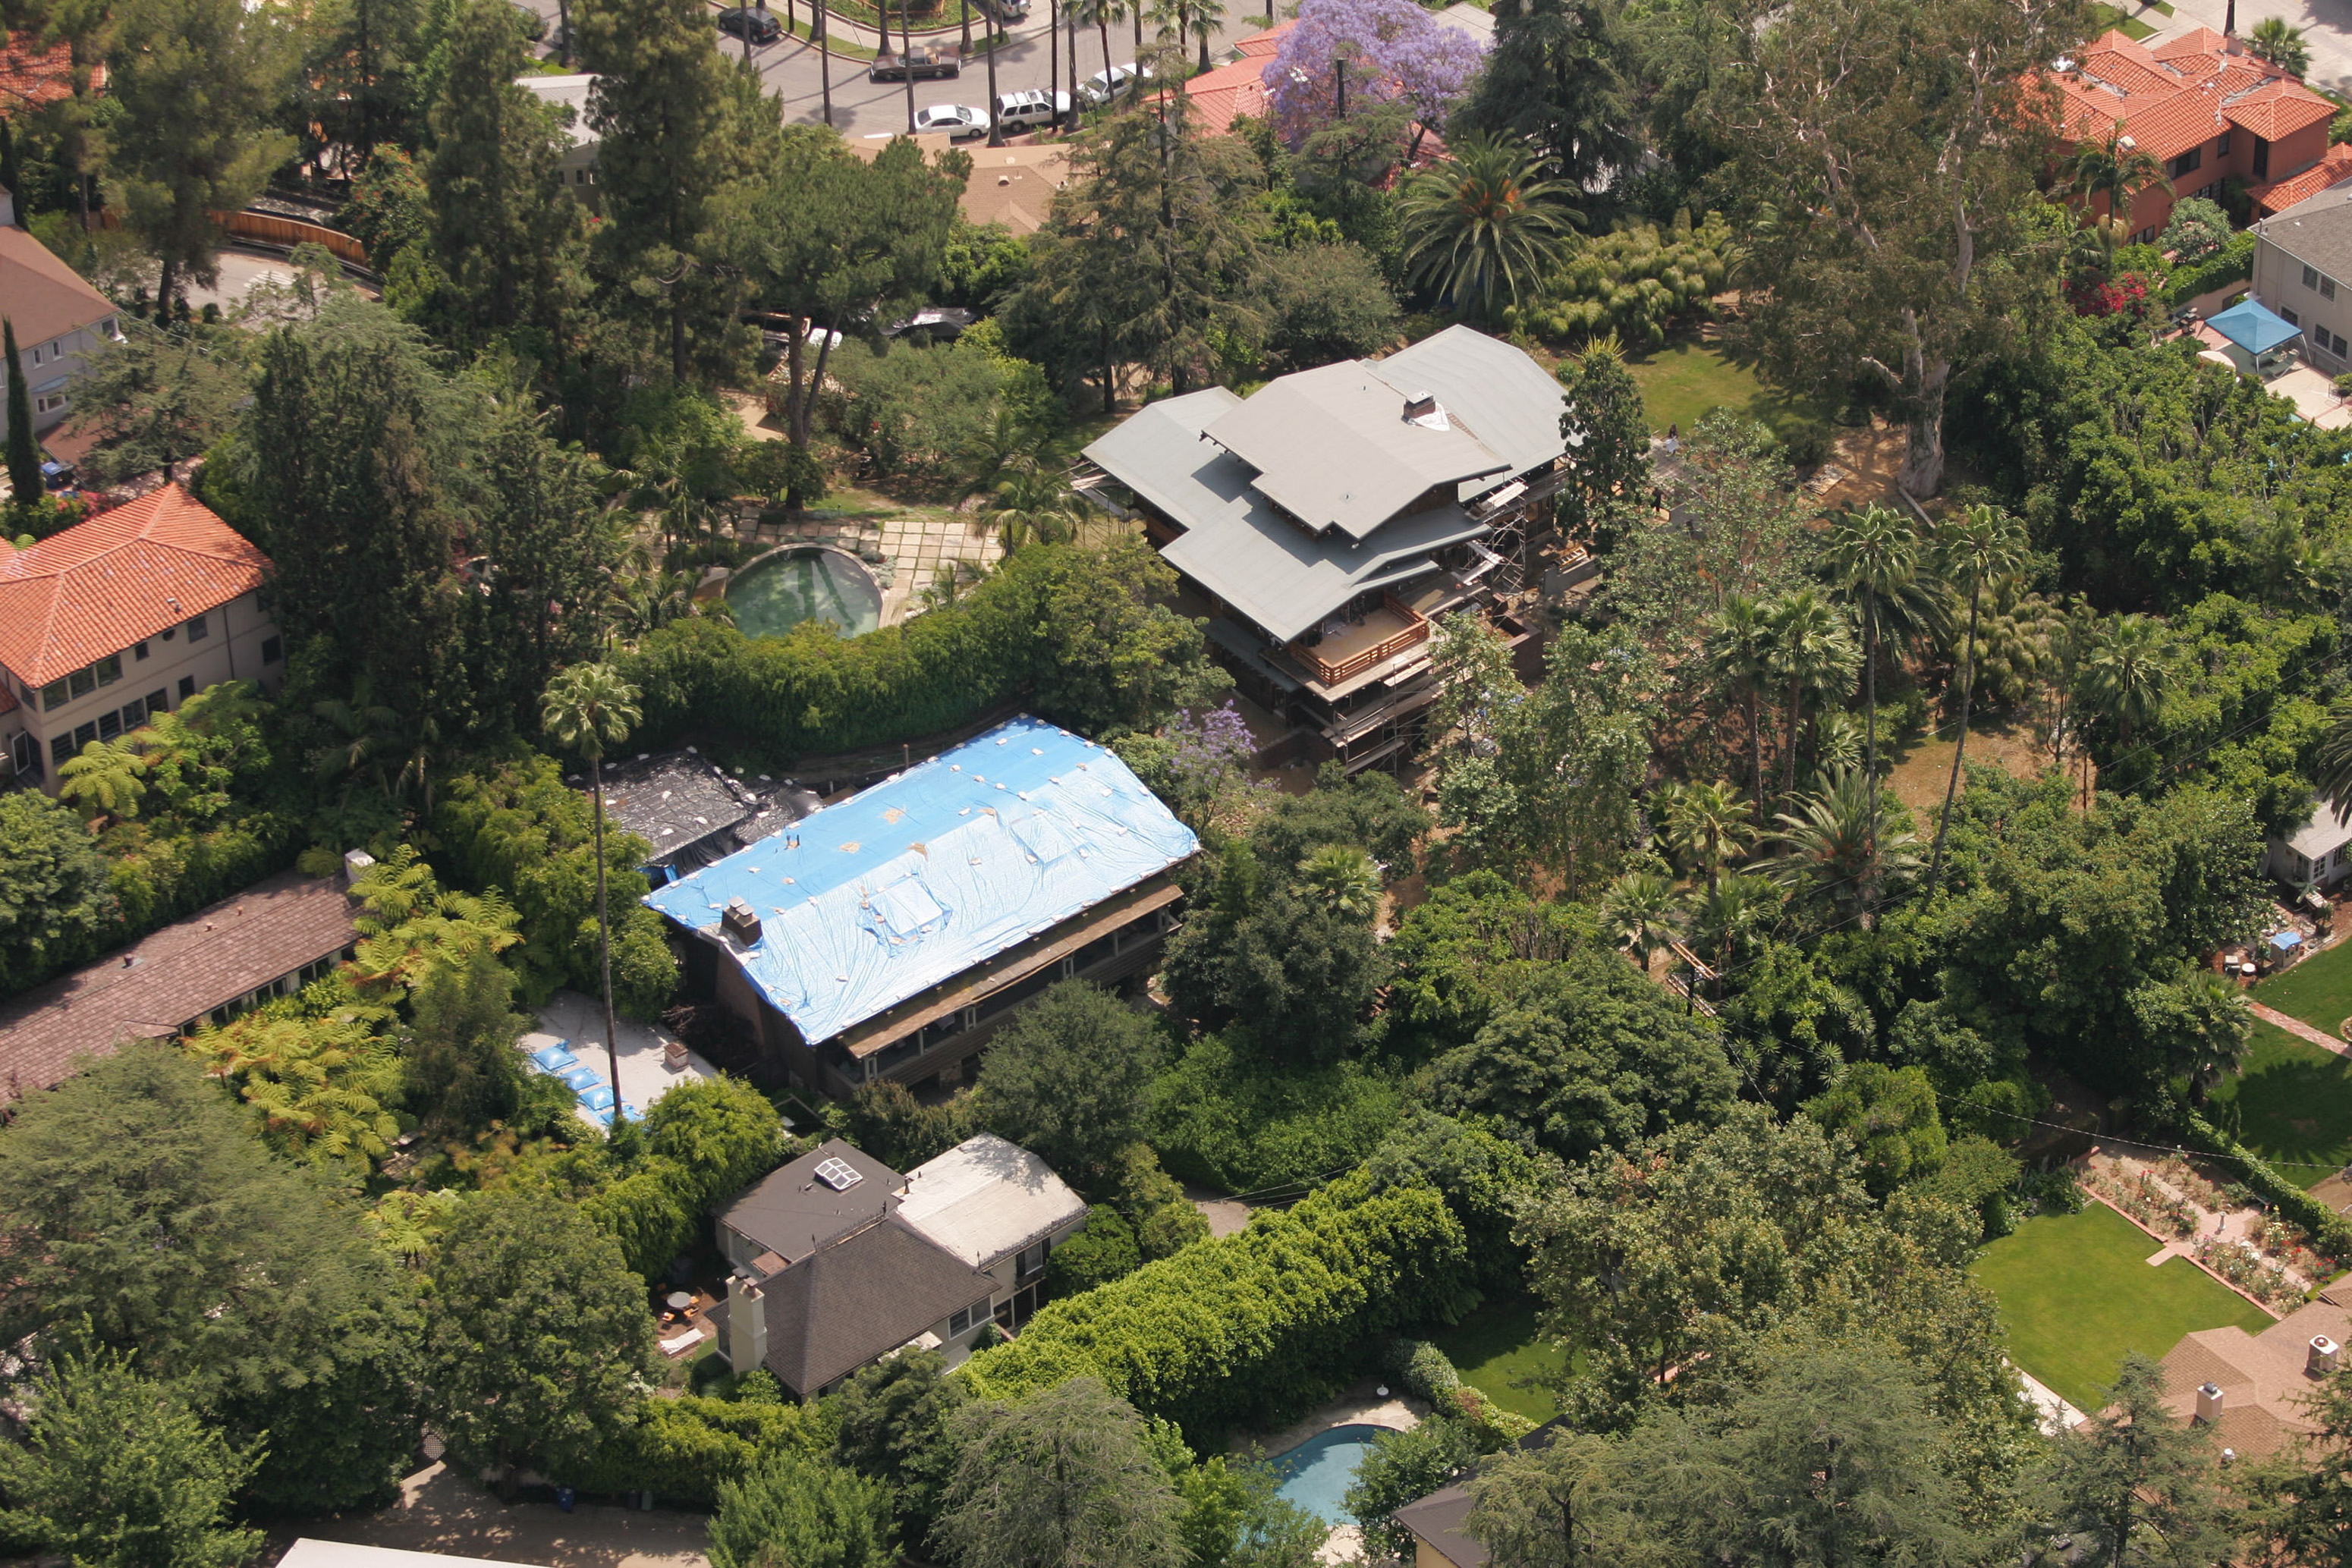 An exterior view of Brad Pitt's residence in 2006 | Source: Getty Images